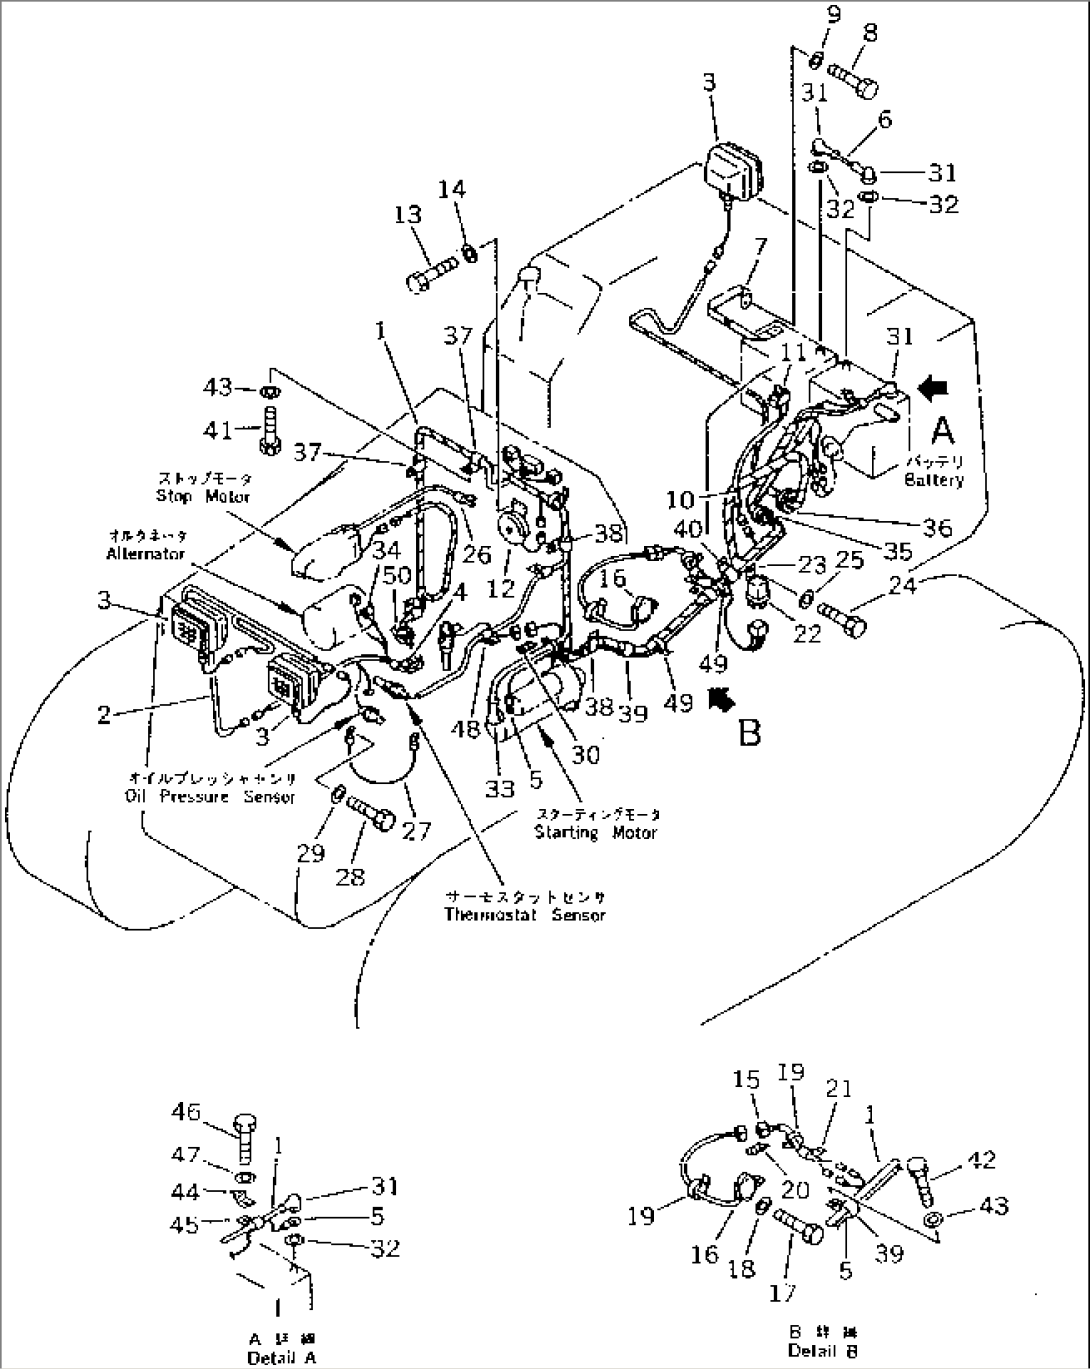 ELECTRICAL SYSTEM (WITH KEY STOP MOTOR) (FOR SHIP